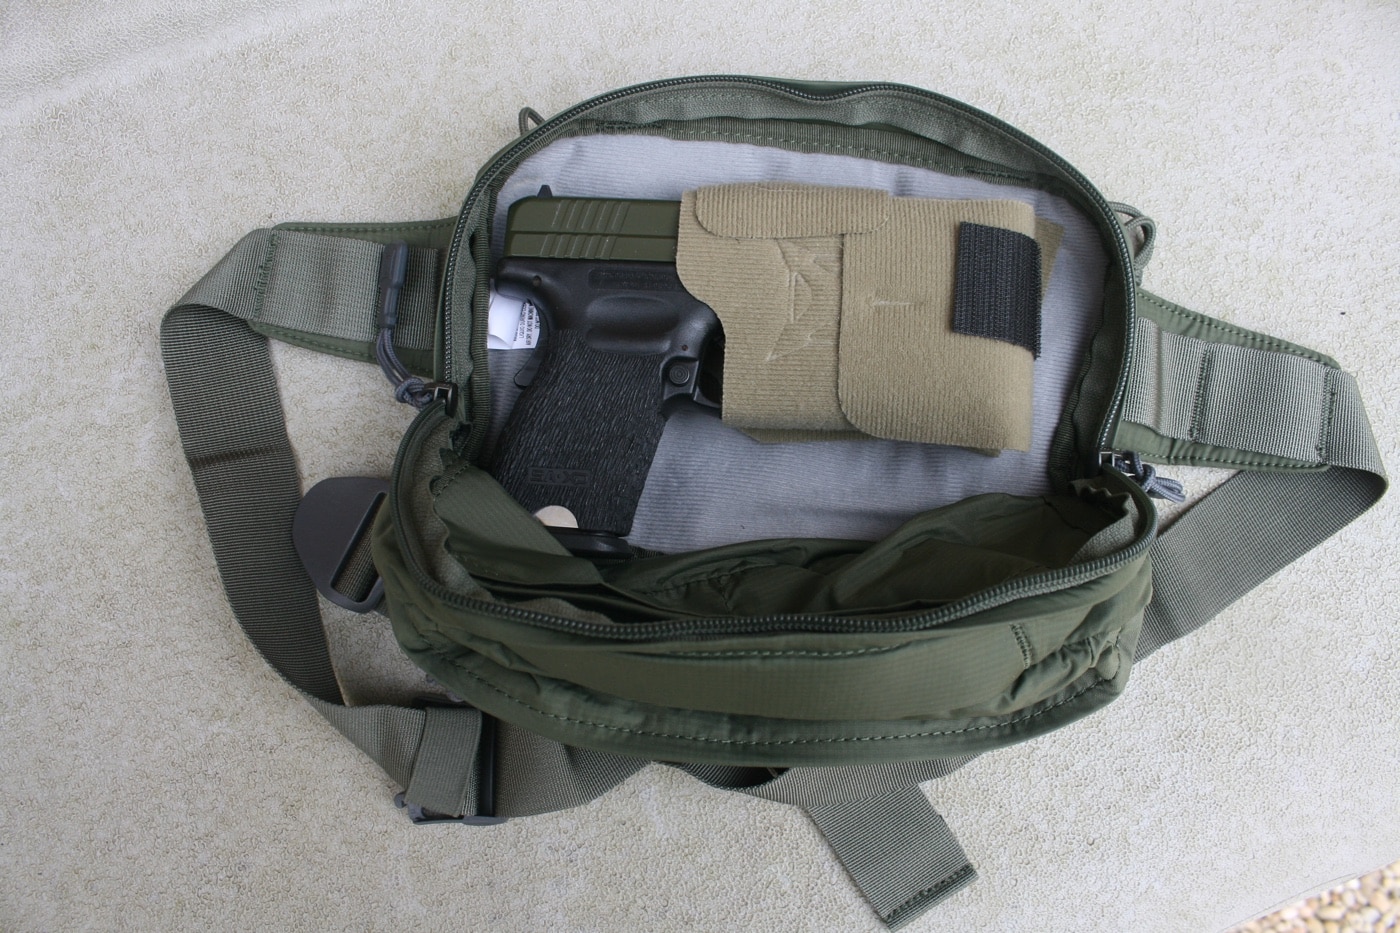 Shown in this photo is a Springfield Armory XD Service Model in 9x19mm Parabellum that is carried in an off-body bag or fanny pack for personal protection by a retired police officer.